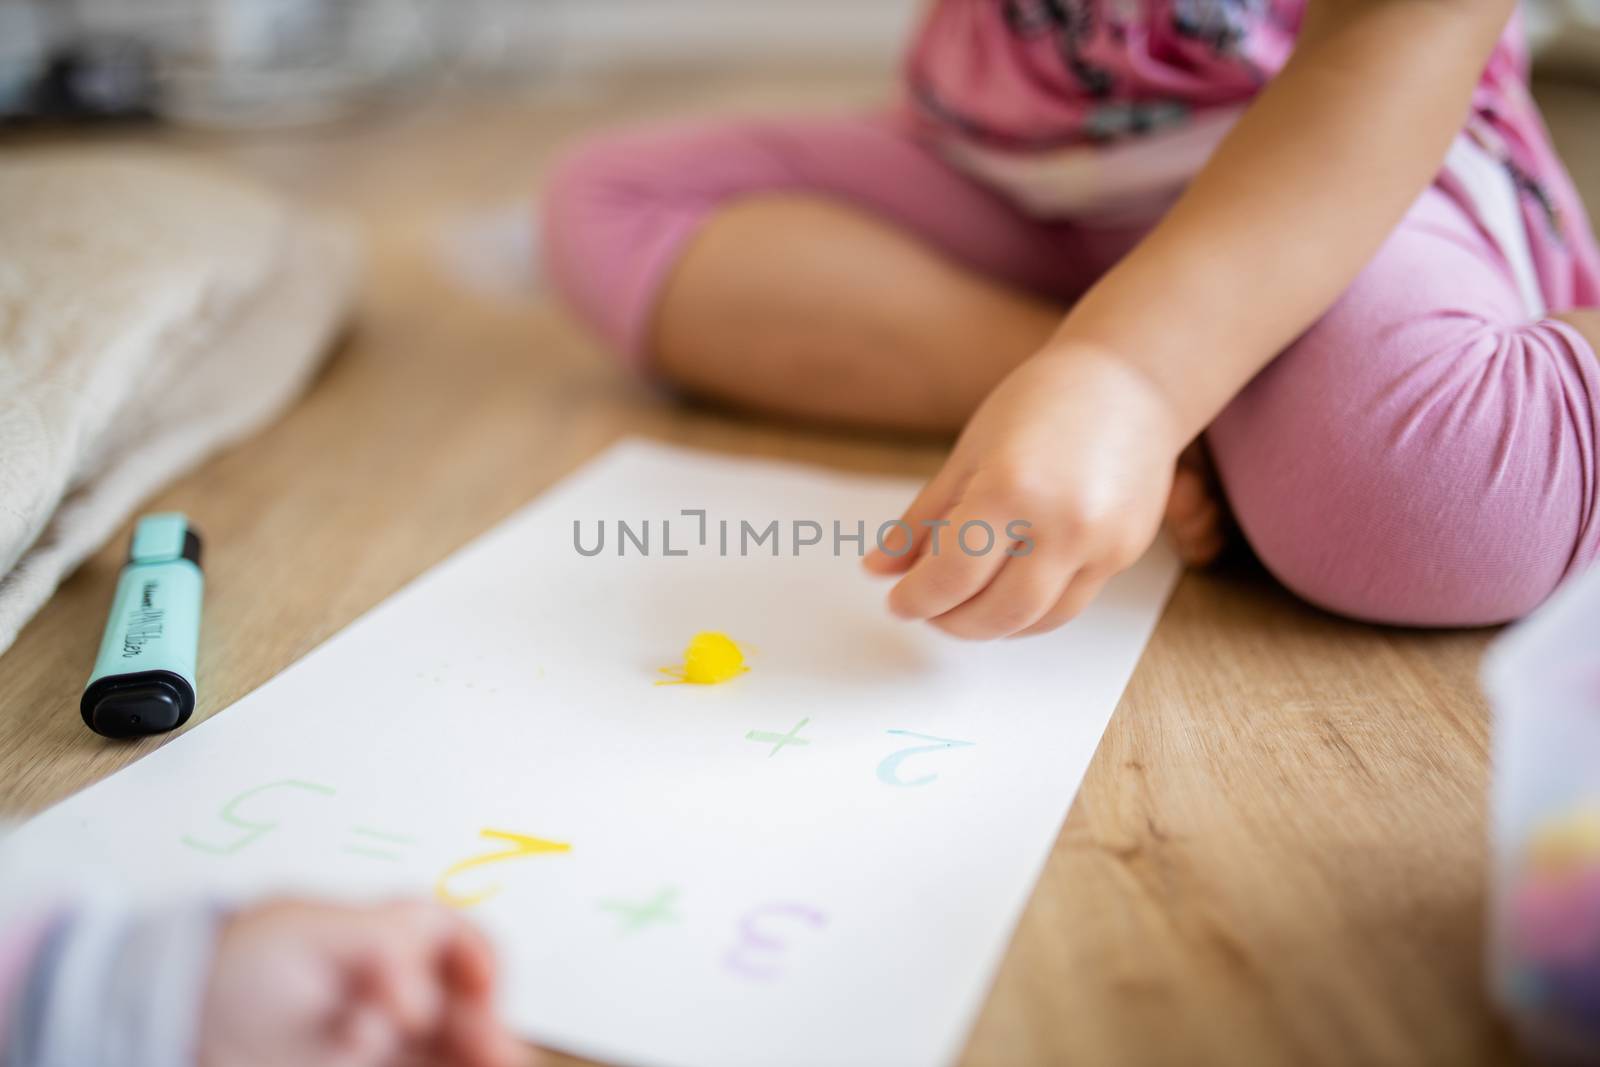 Picture of the legs of a little girl sitting on a wooden floor alongside a yellow cotton ball, sums on a paper sheet, and the blurry arm of a baby